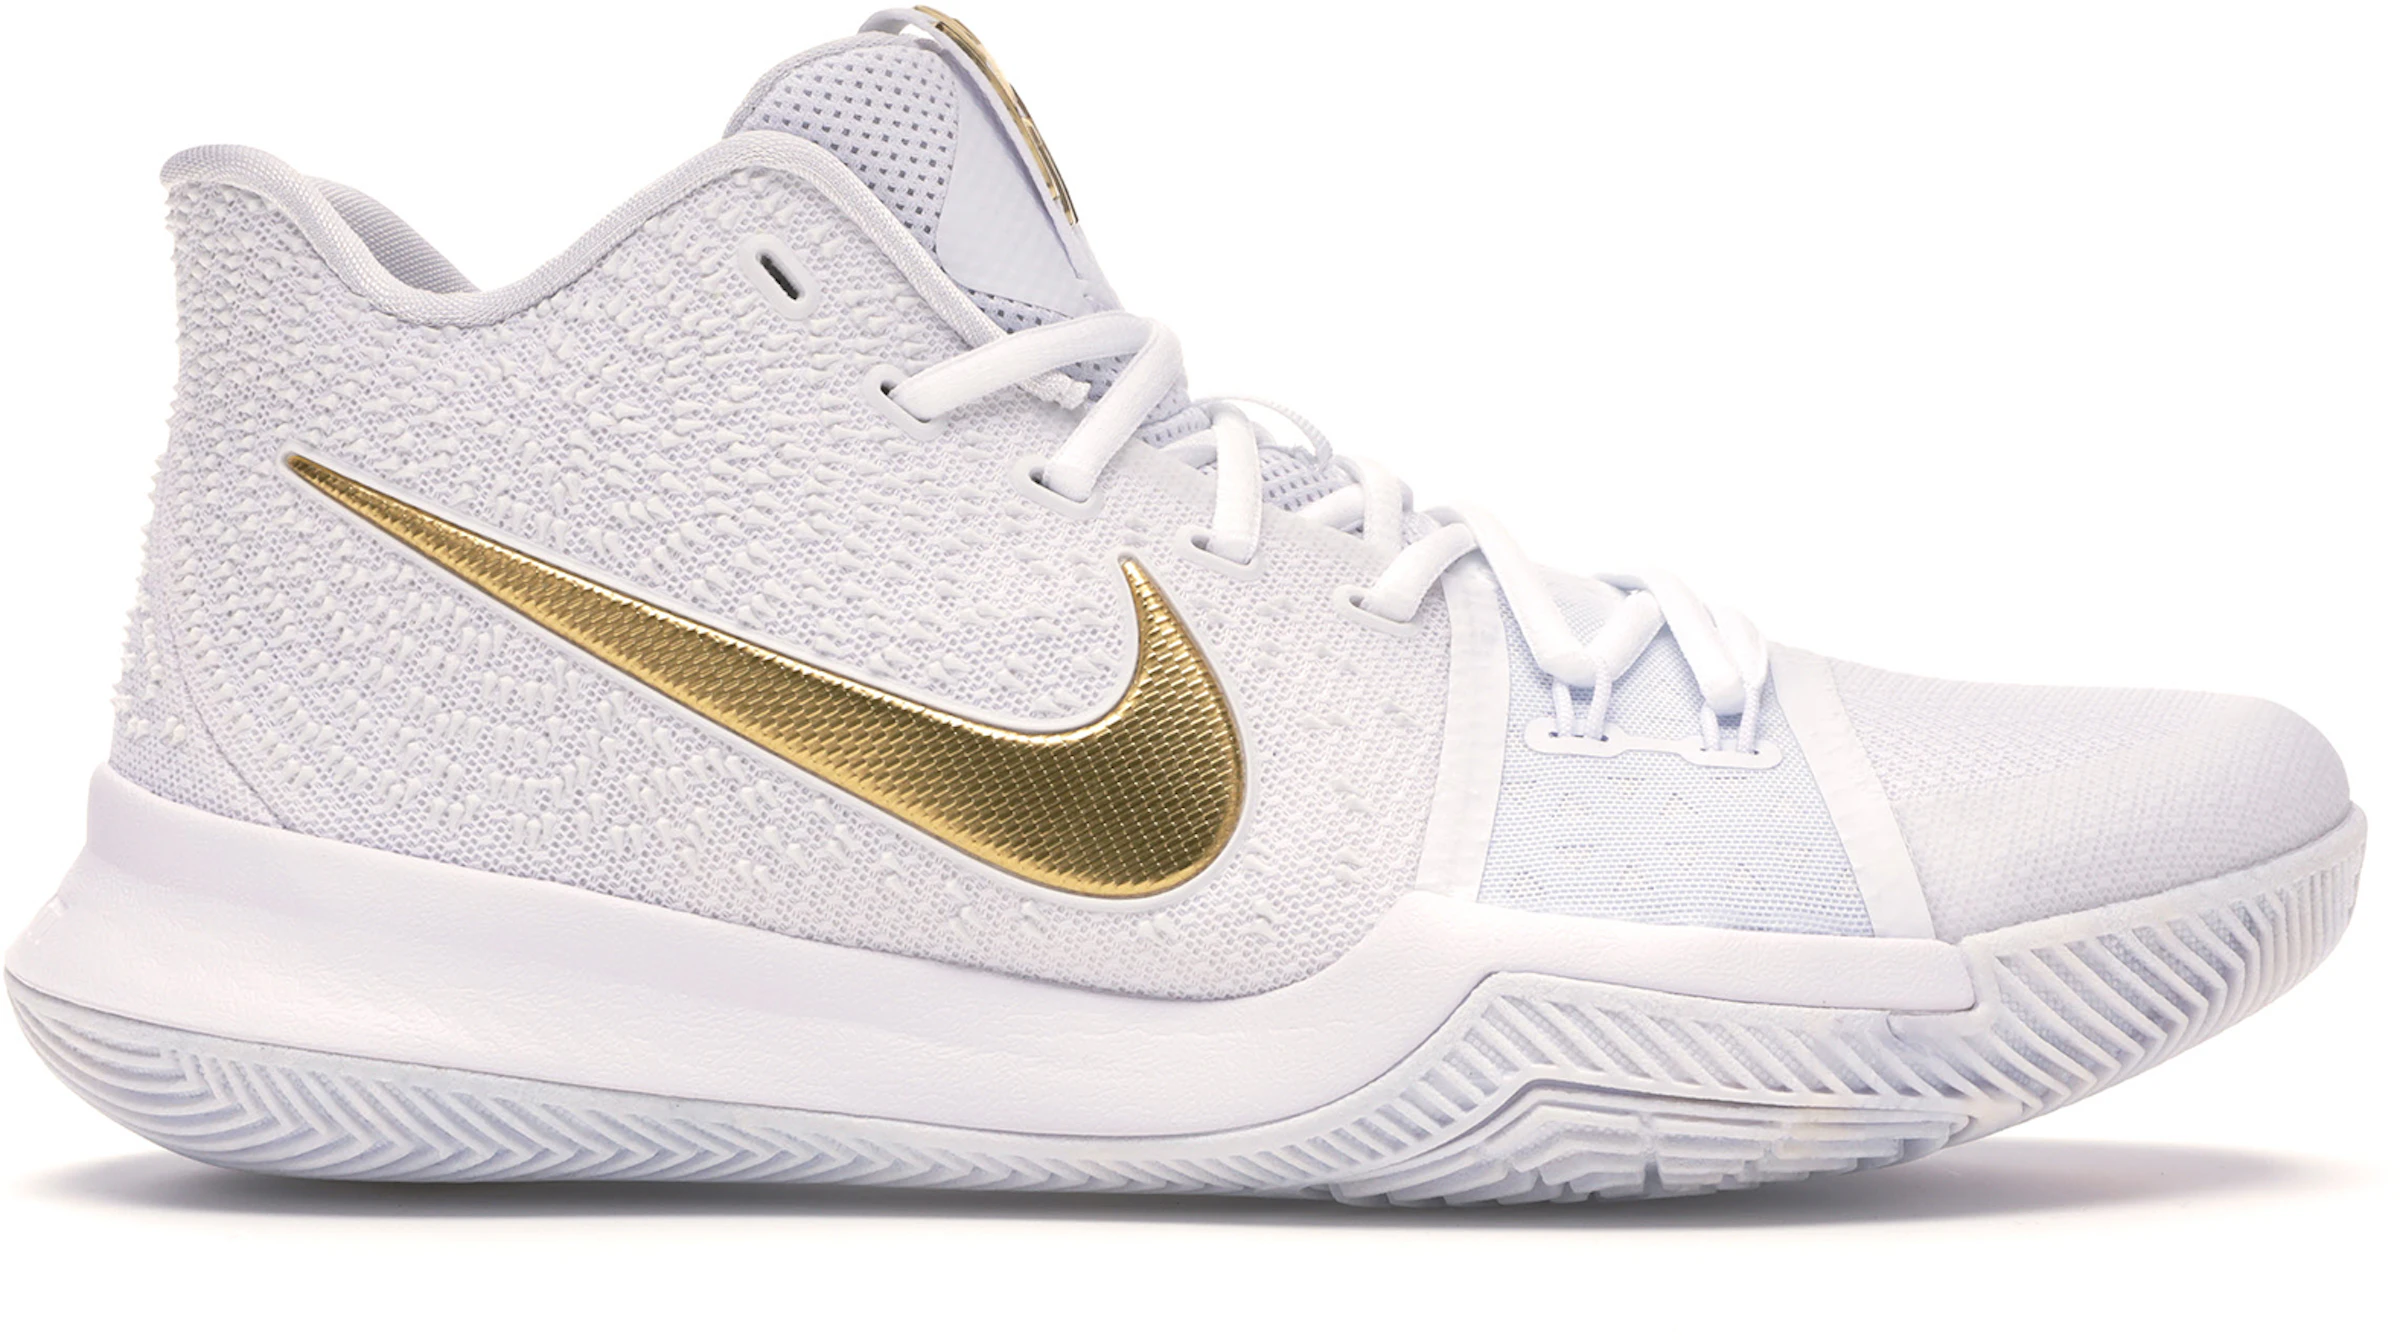 Nike Kyrie 3 Finals Gold - -